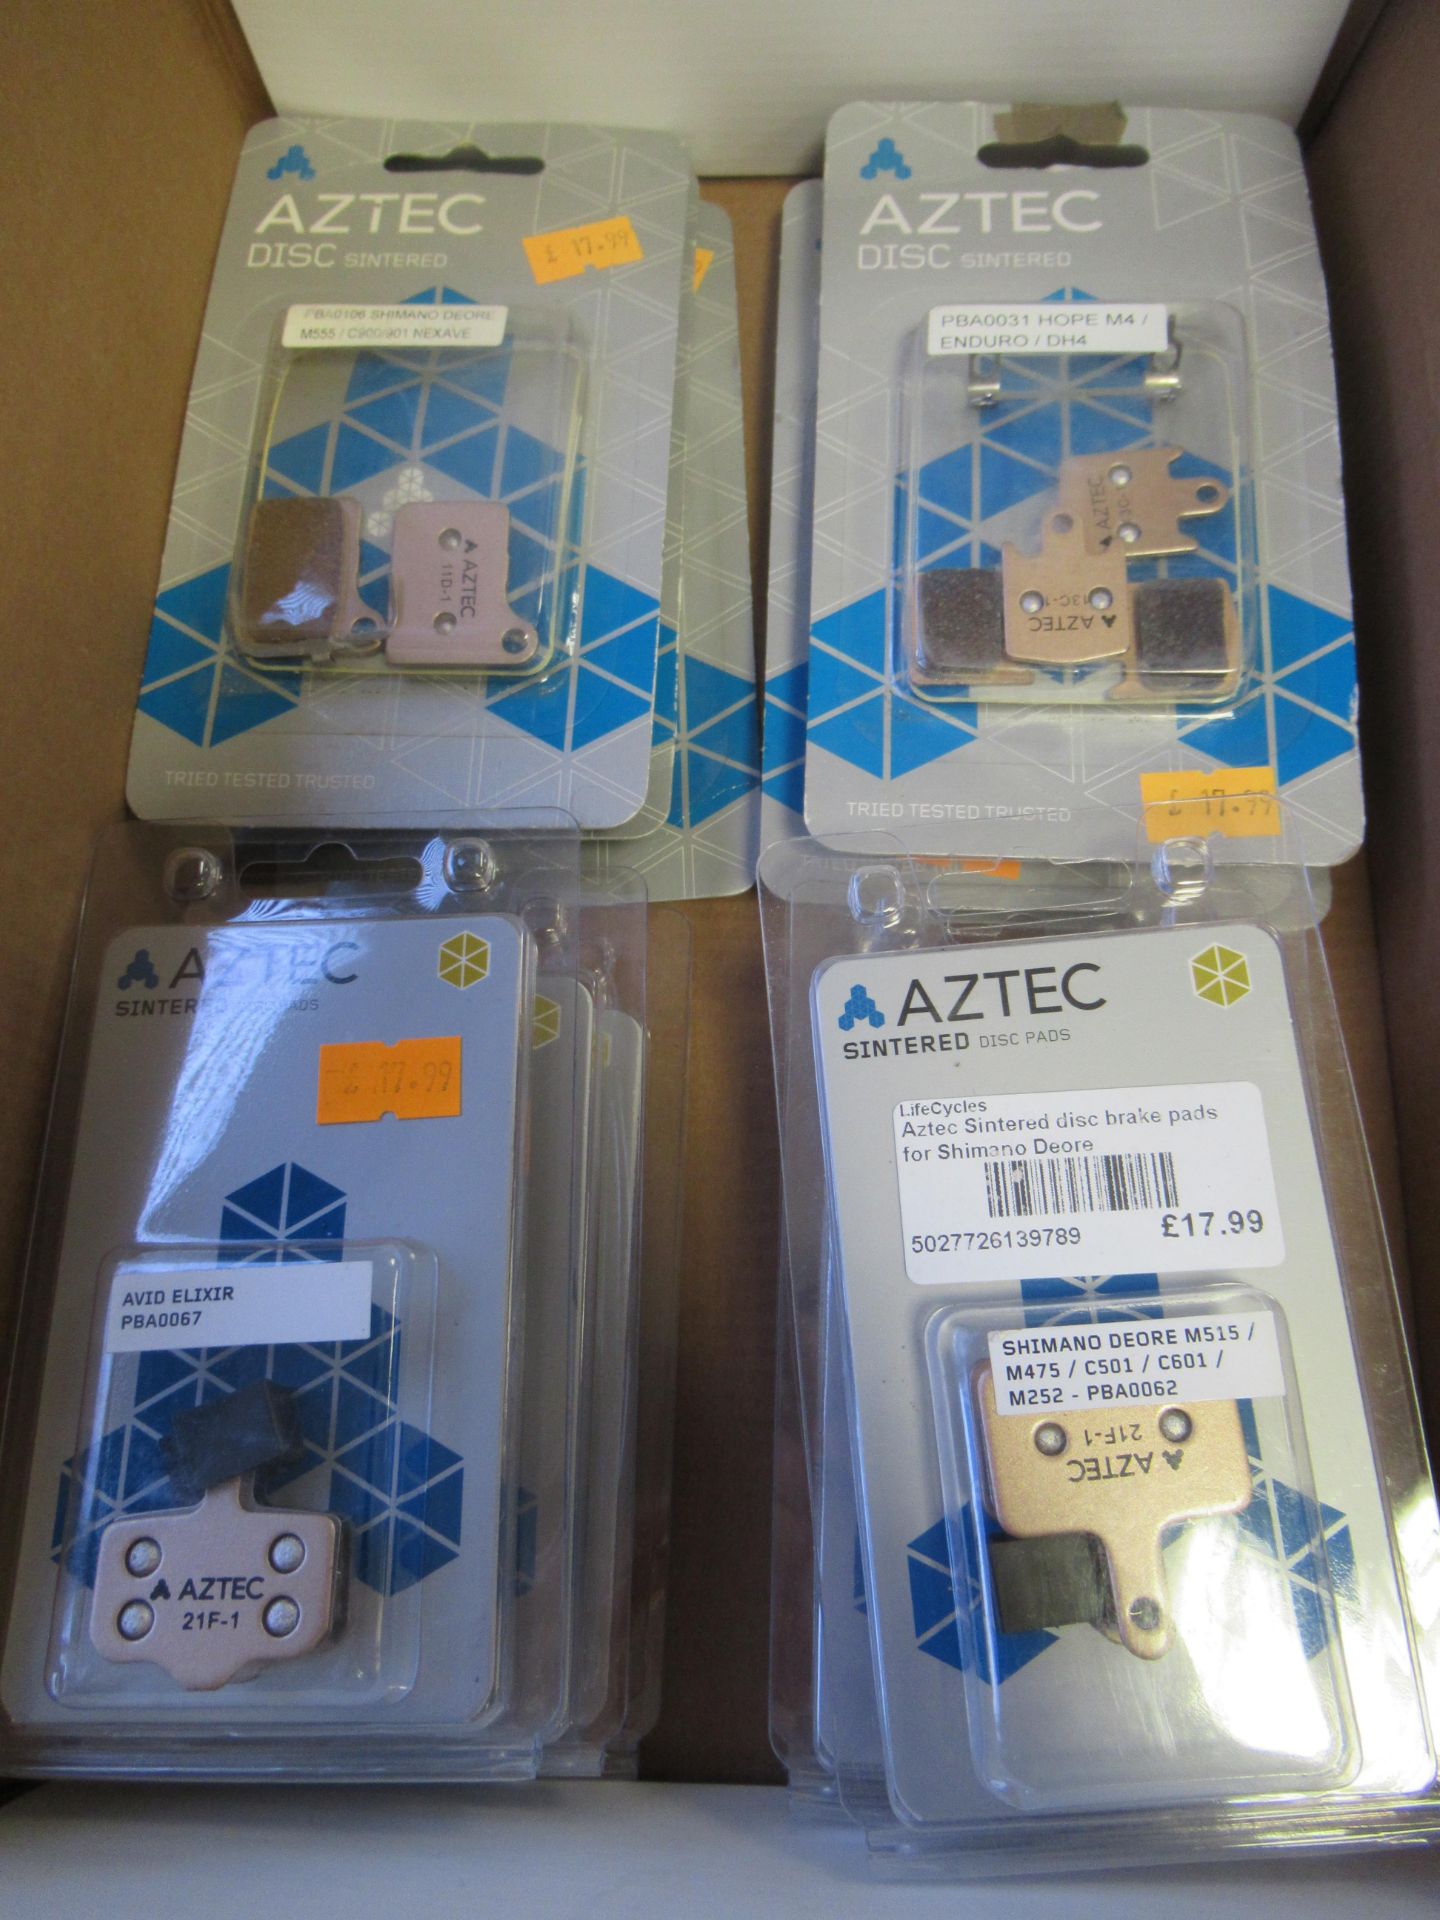 Aztec Disc Pads to include 3x Disc Sintered, PBA0106 Shimano Deore M555/ C900/01 Nexave; 3x Disc Sin